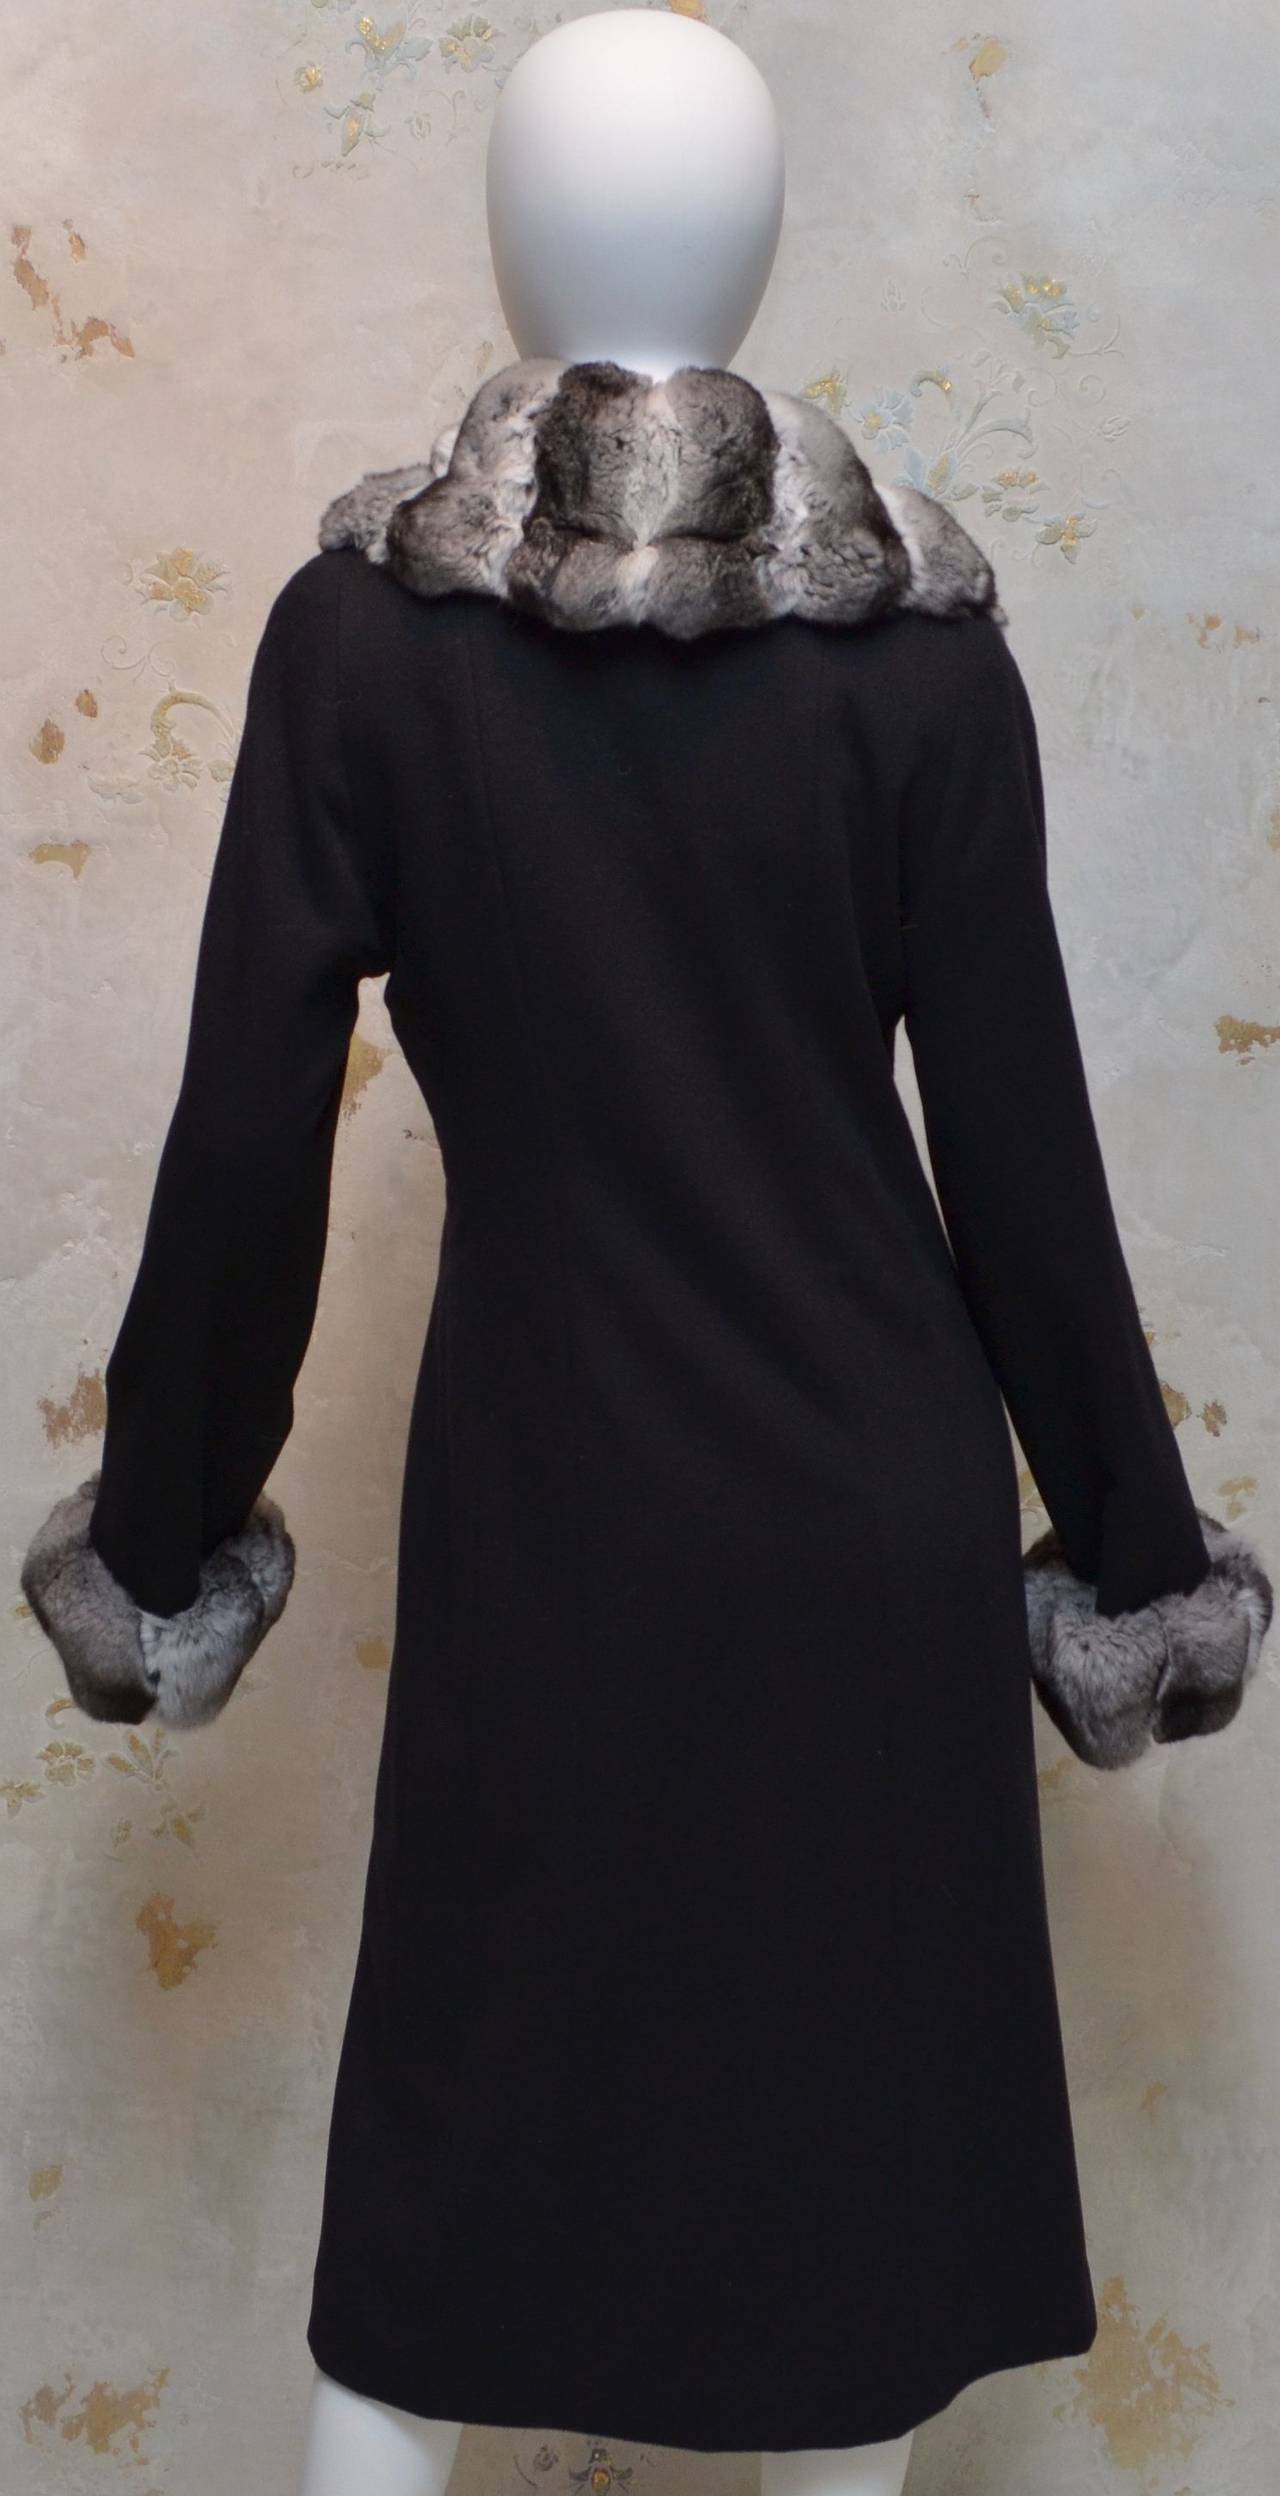 Loro Piana cashmere coat features a chinchilla fur trim along the collar and cuffs, button closures along the front, fully lined, pockets at the hips, and is 100% cashmere. 

Measurements:
Bust - 38''
Sleeves - 28''
Waist - 34''
Hips -